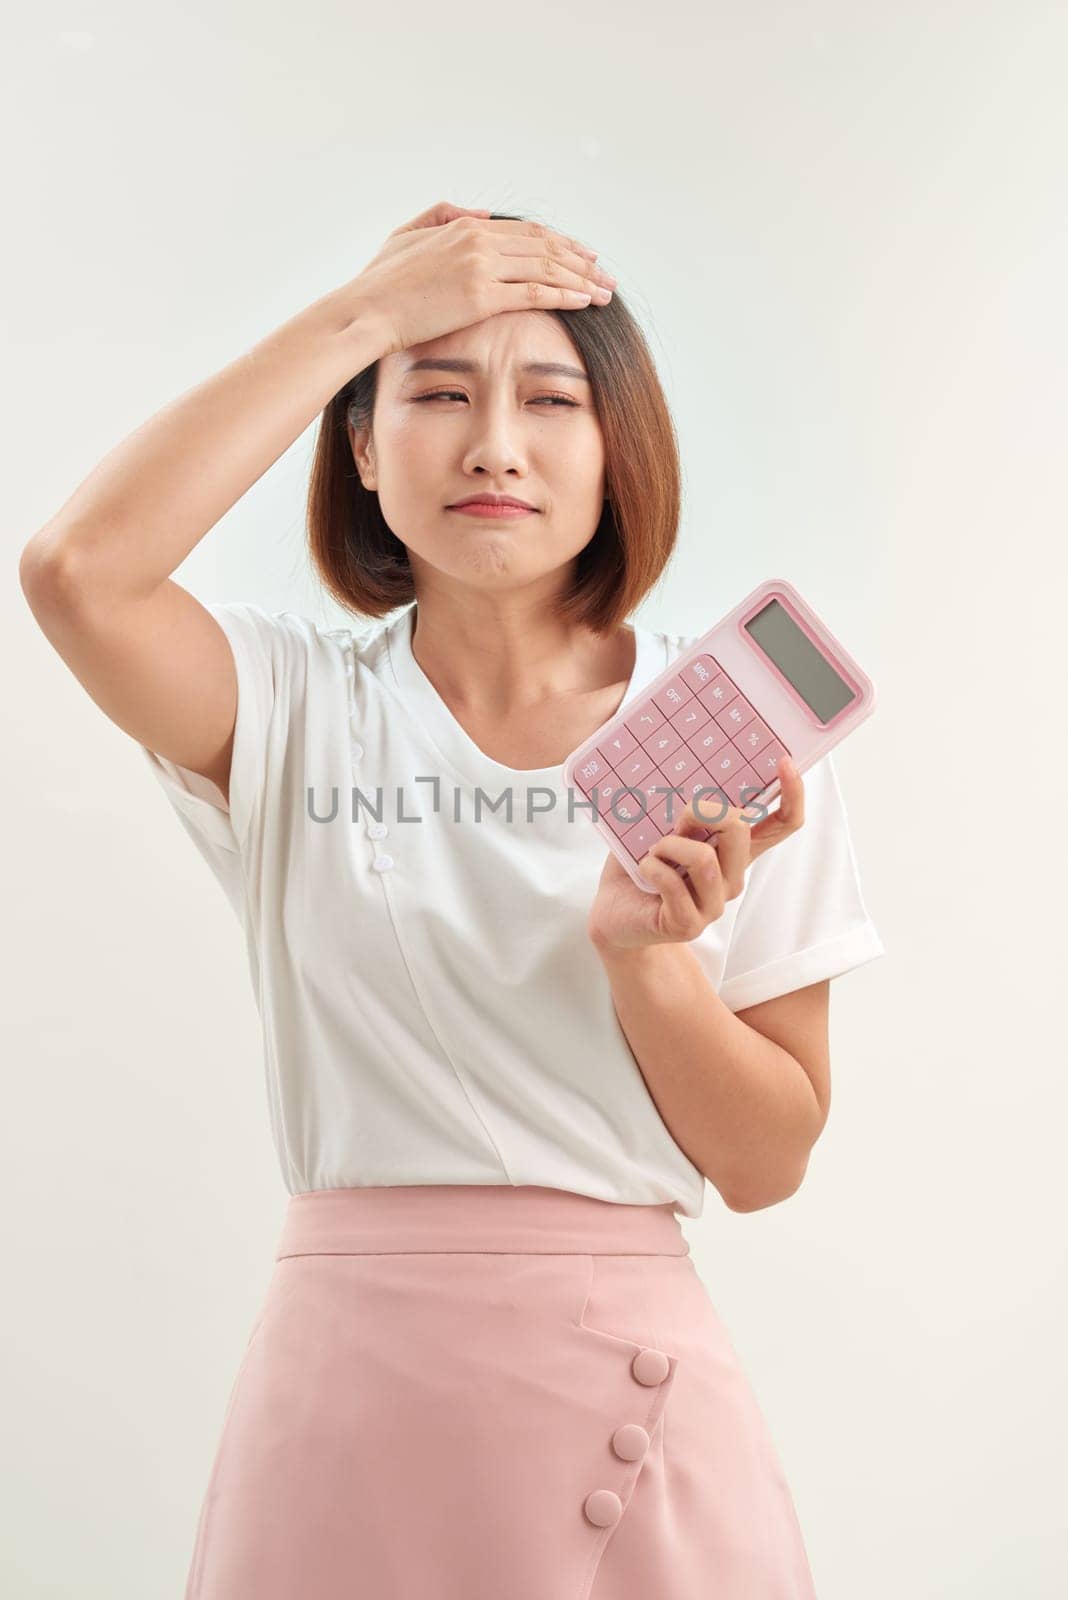 Feeling stress, unhappy, worry about the receipt or slip and the calculator in front for calculate payment or burden of over shopping by makidotvn